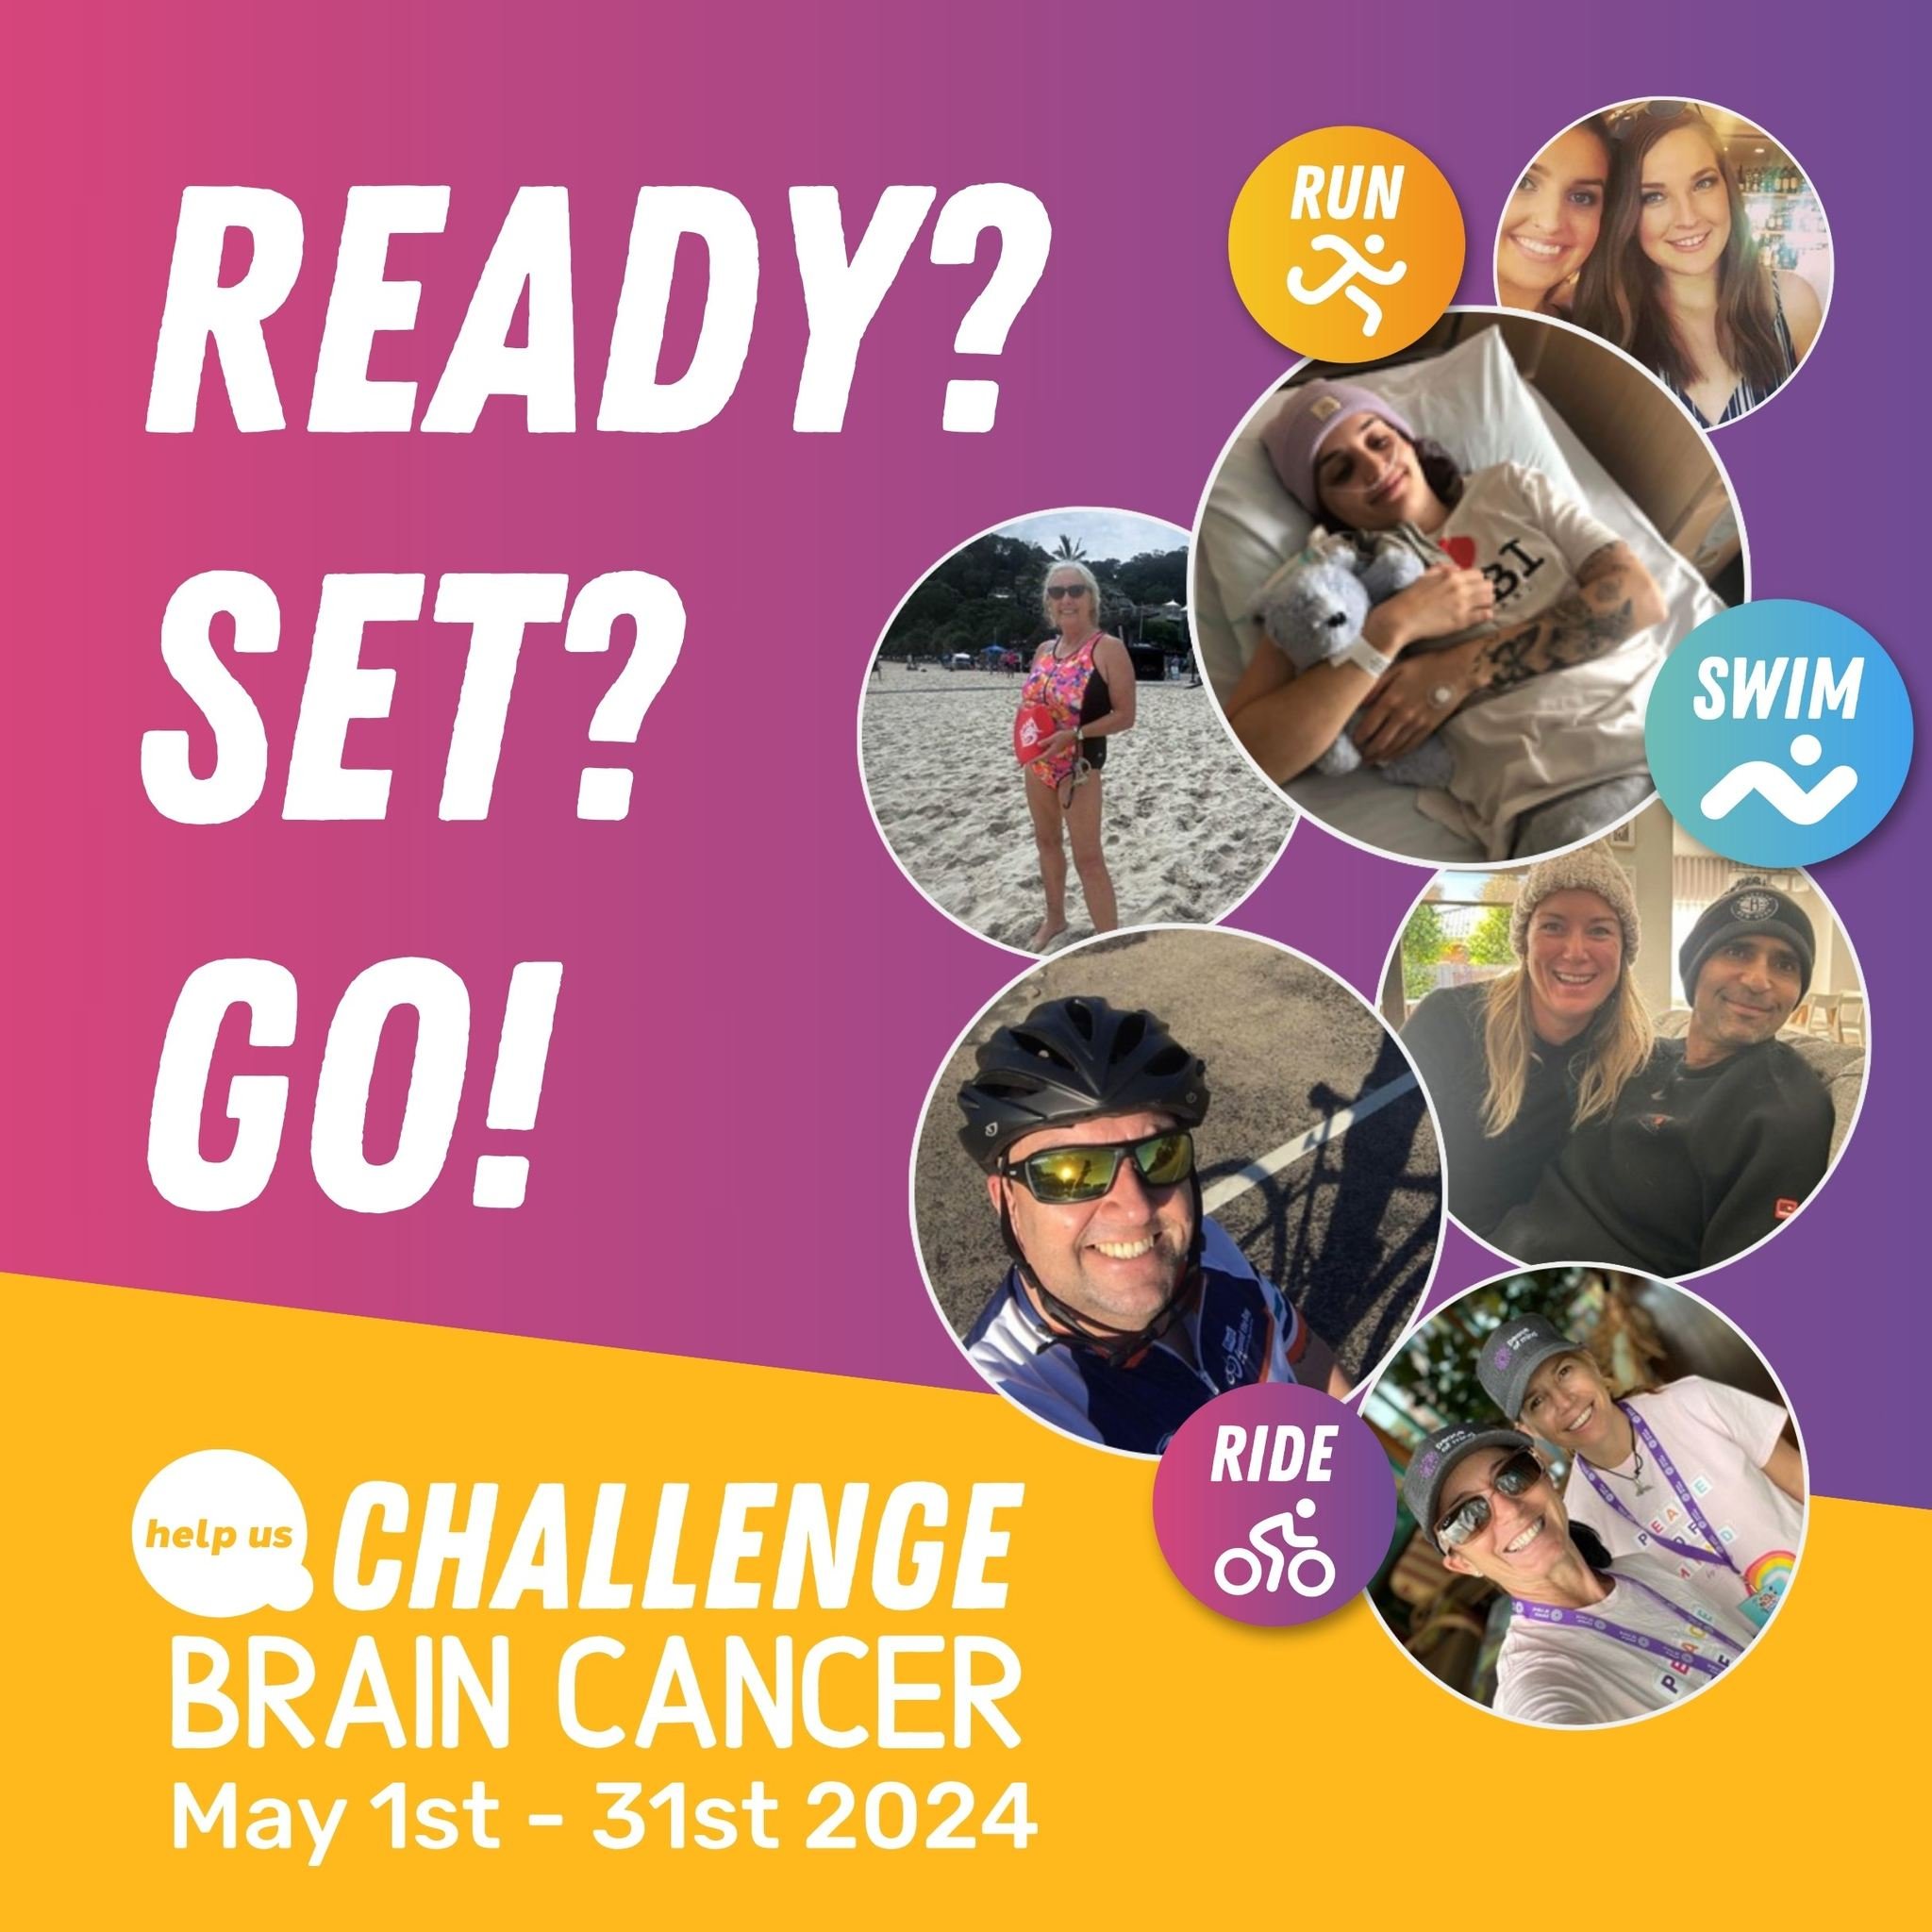 And we're off! Happy May 1st and the first day of Challenge Brain Cancer 2024. Remember to share your progress this month as you help raise funds for Australians affected by a brain cancer diagnosis. Use the hashtag #ChallangeBrainCancer2024 to featu